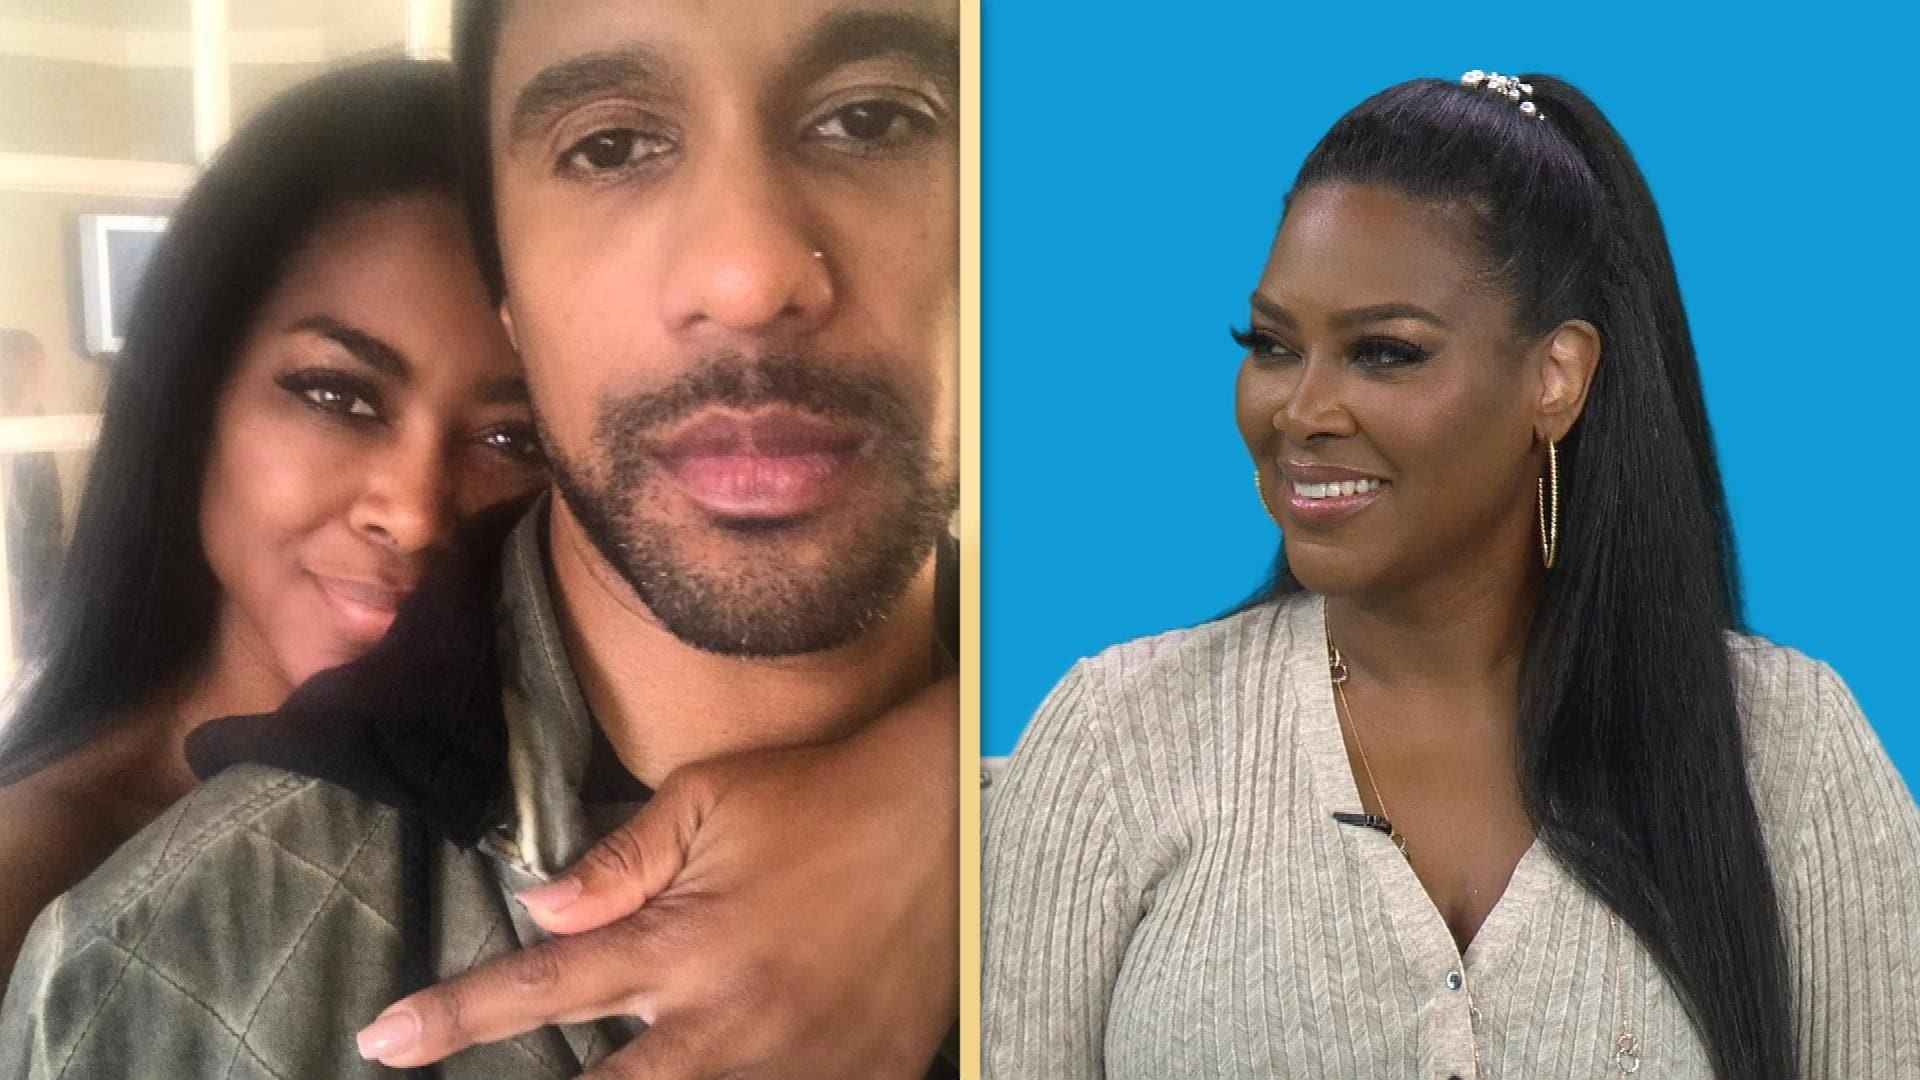 Kenya Moore Confesses To Andy Cohen That Marc Daly Doesn't Want To Break Up: 'He Wants To Work On The marriage And Be A Better Person'